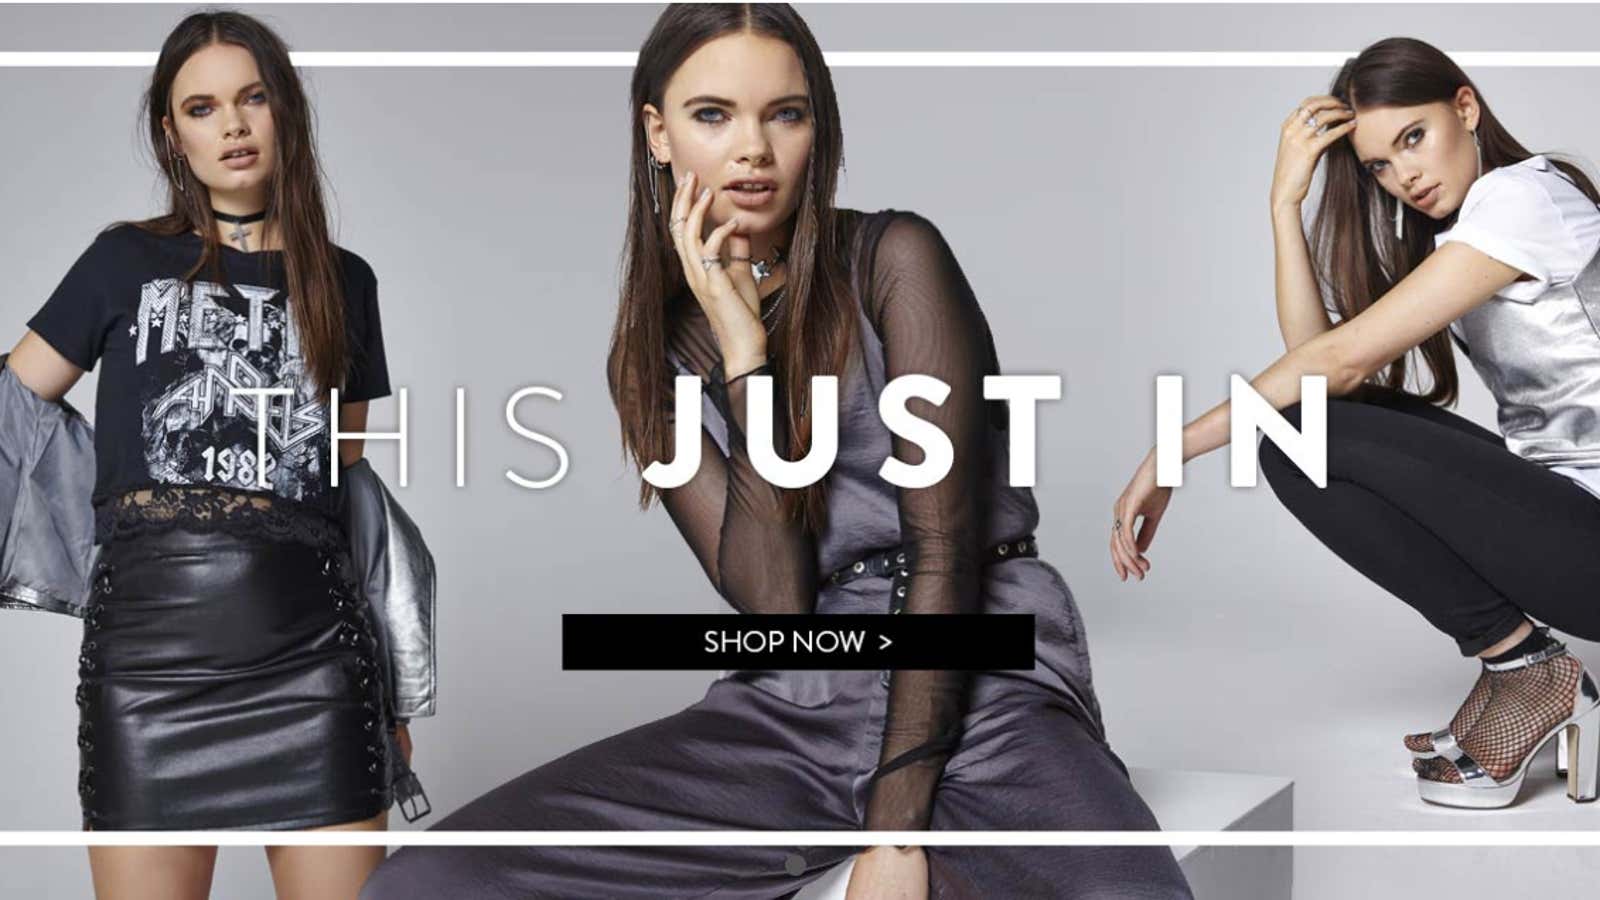 Something is always “just in” at Boohoo.